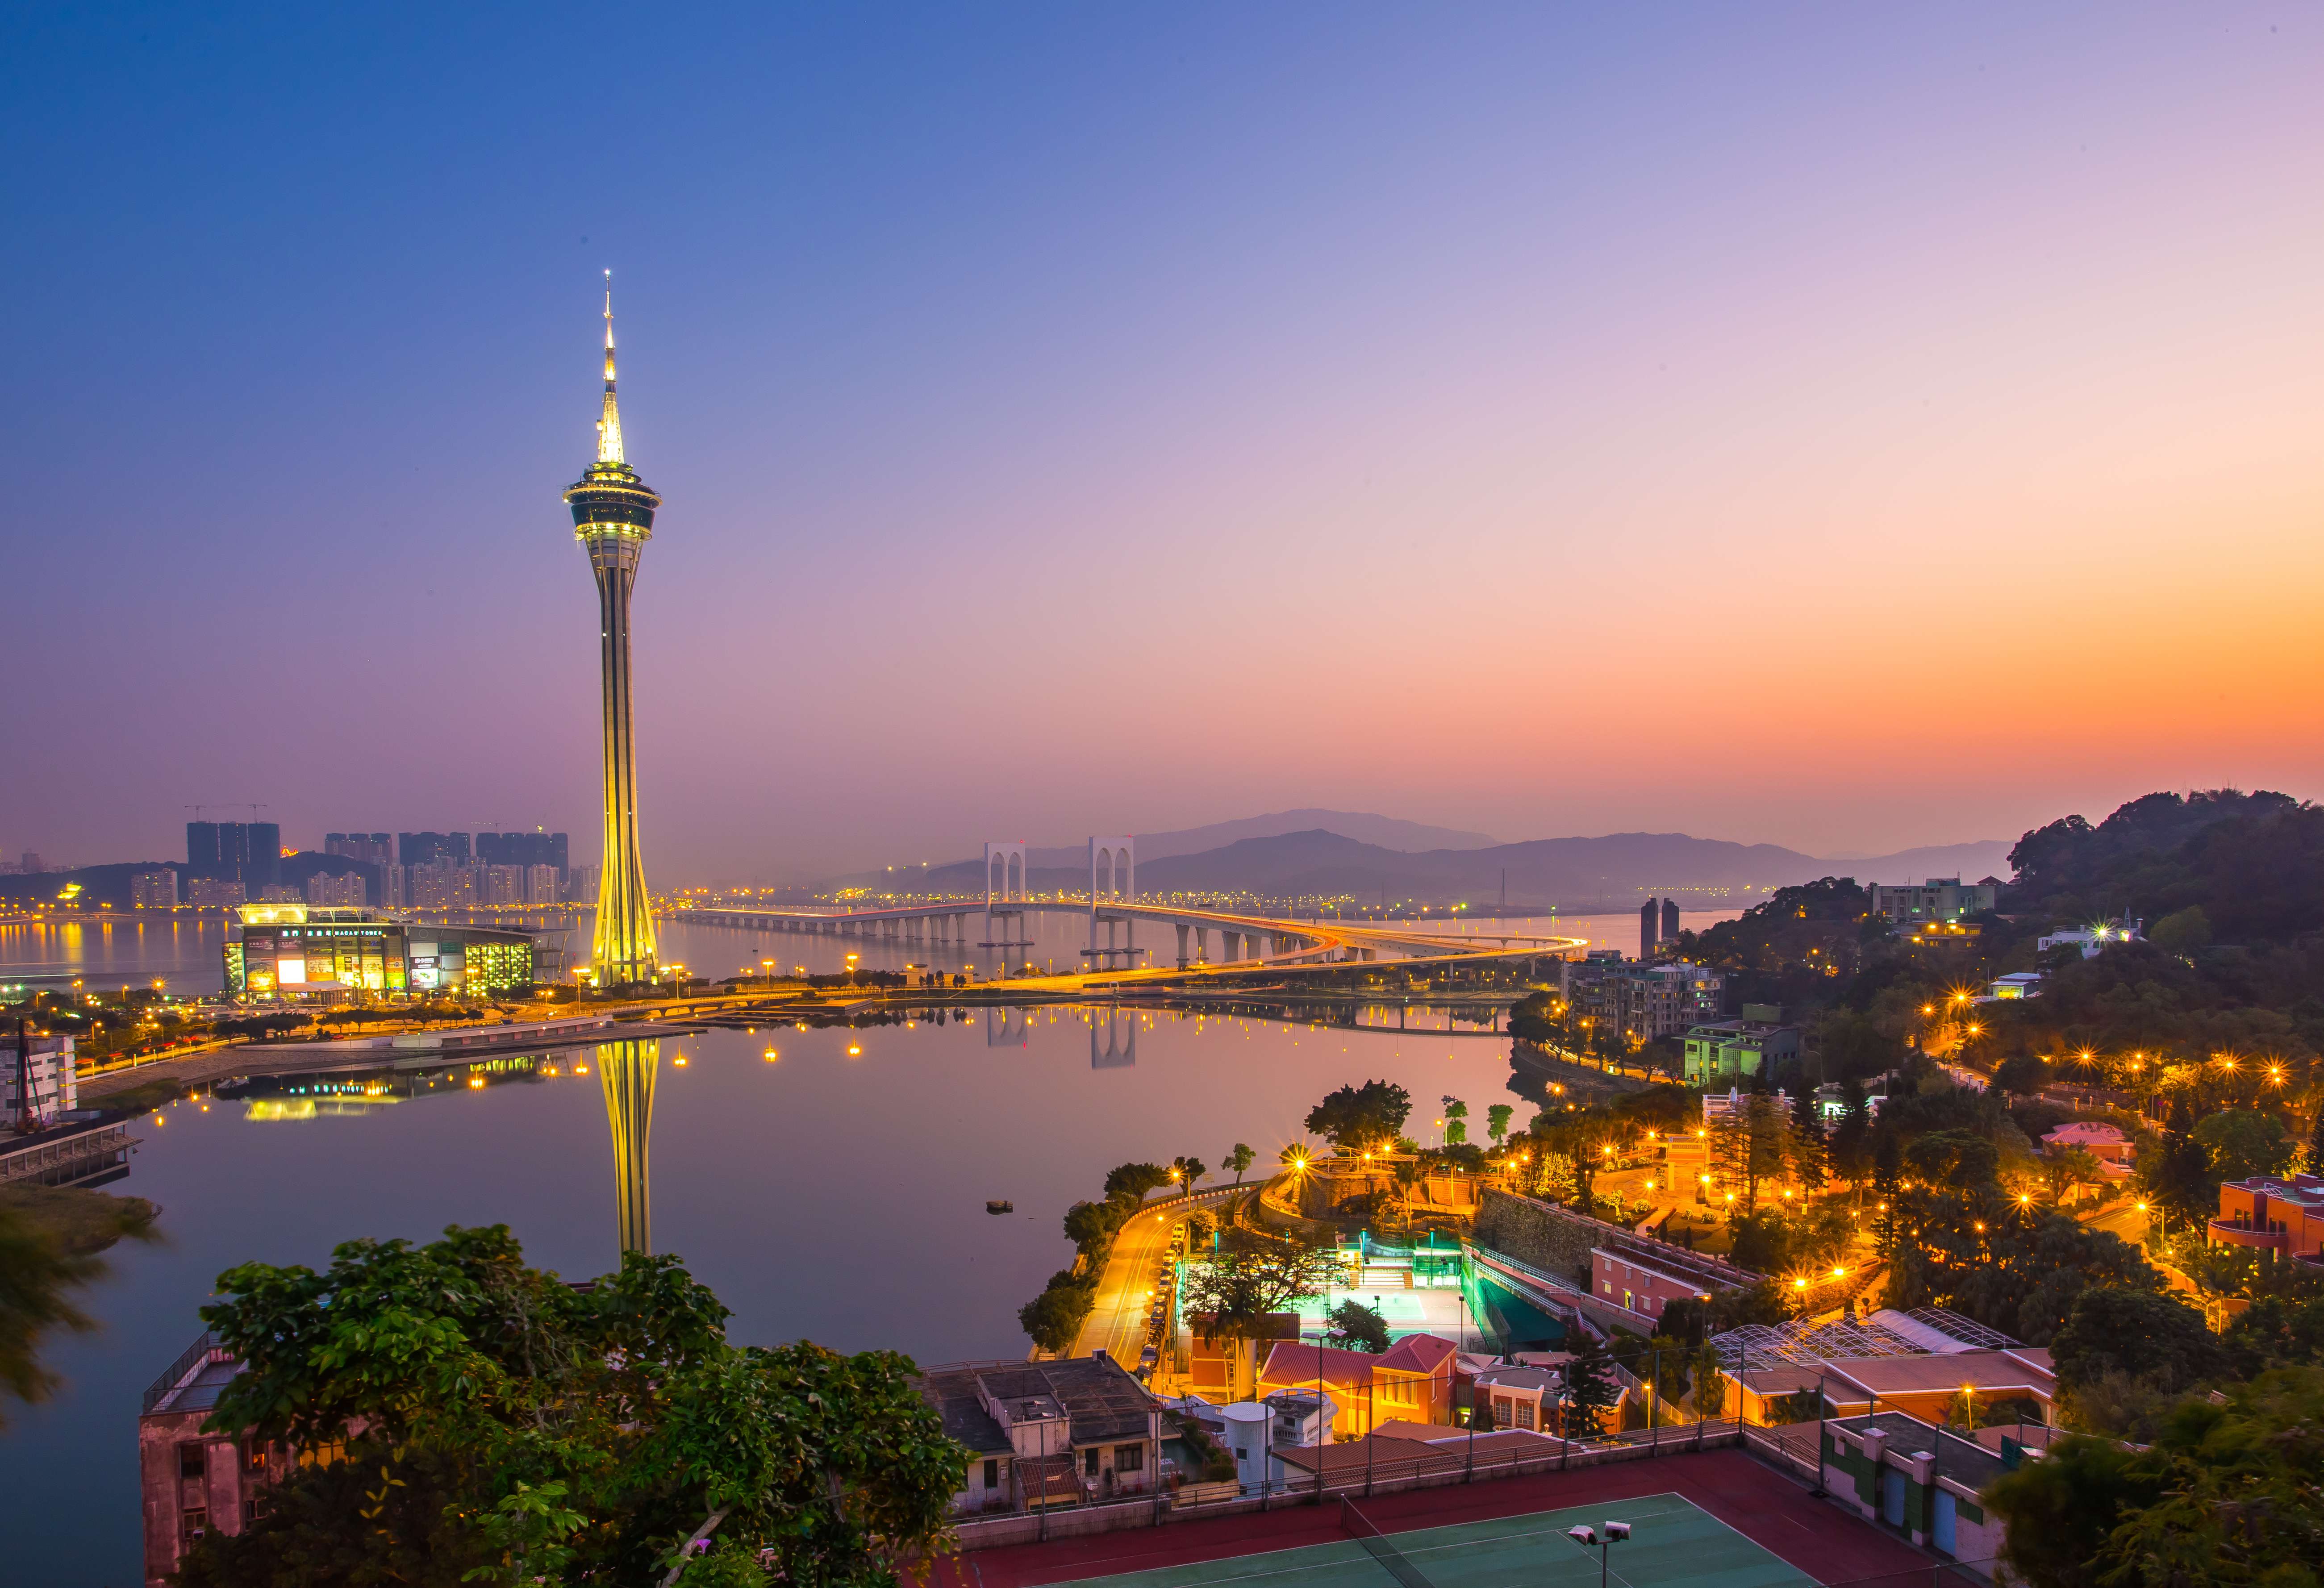 Macau is aiming to lessen its reliance on gambling and is hoping to raise the proportion of non-gaming revenue from its casinos. Photo: Thinkstock